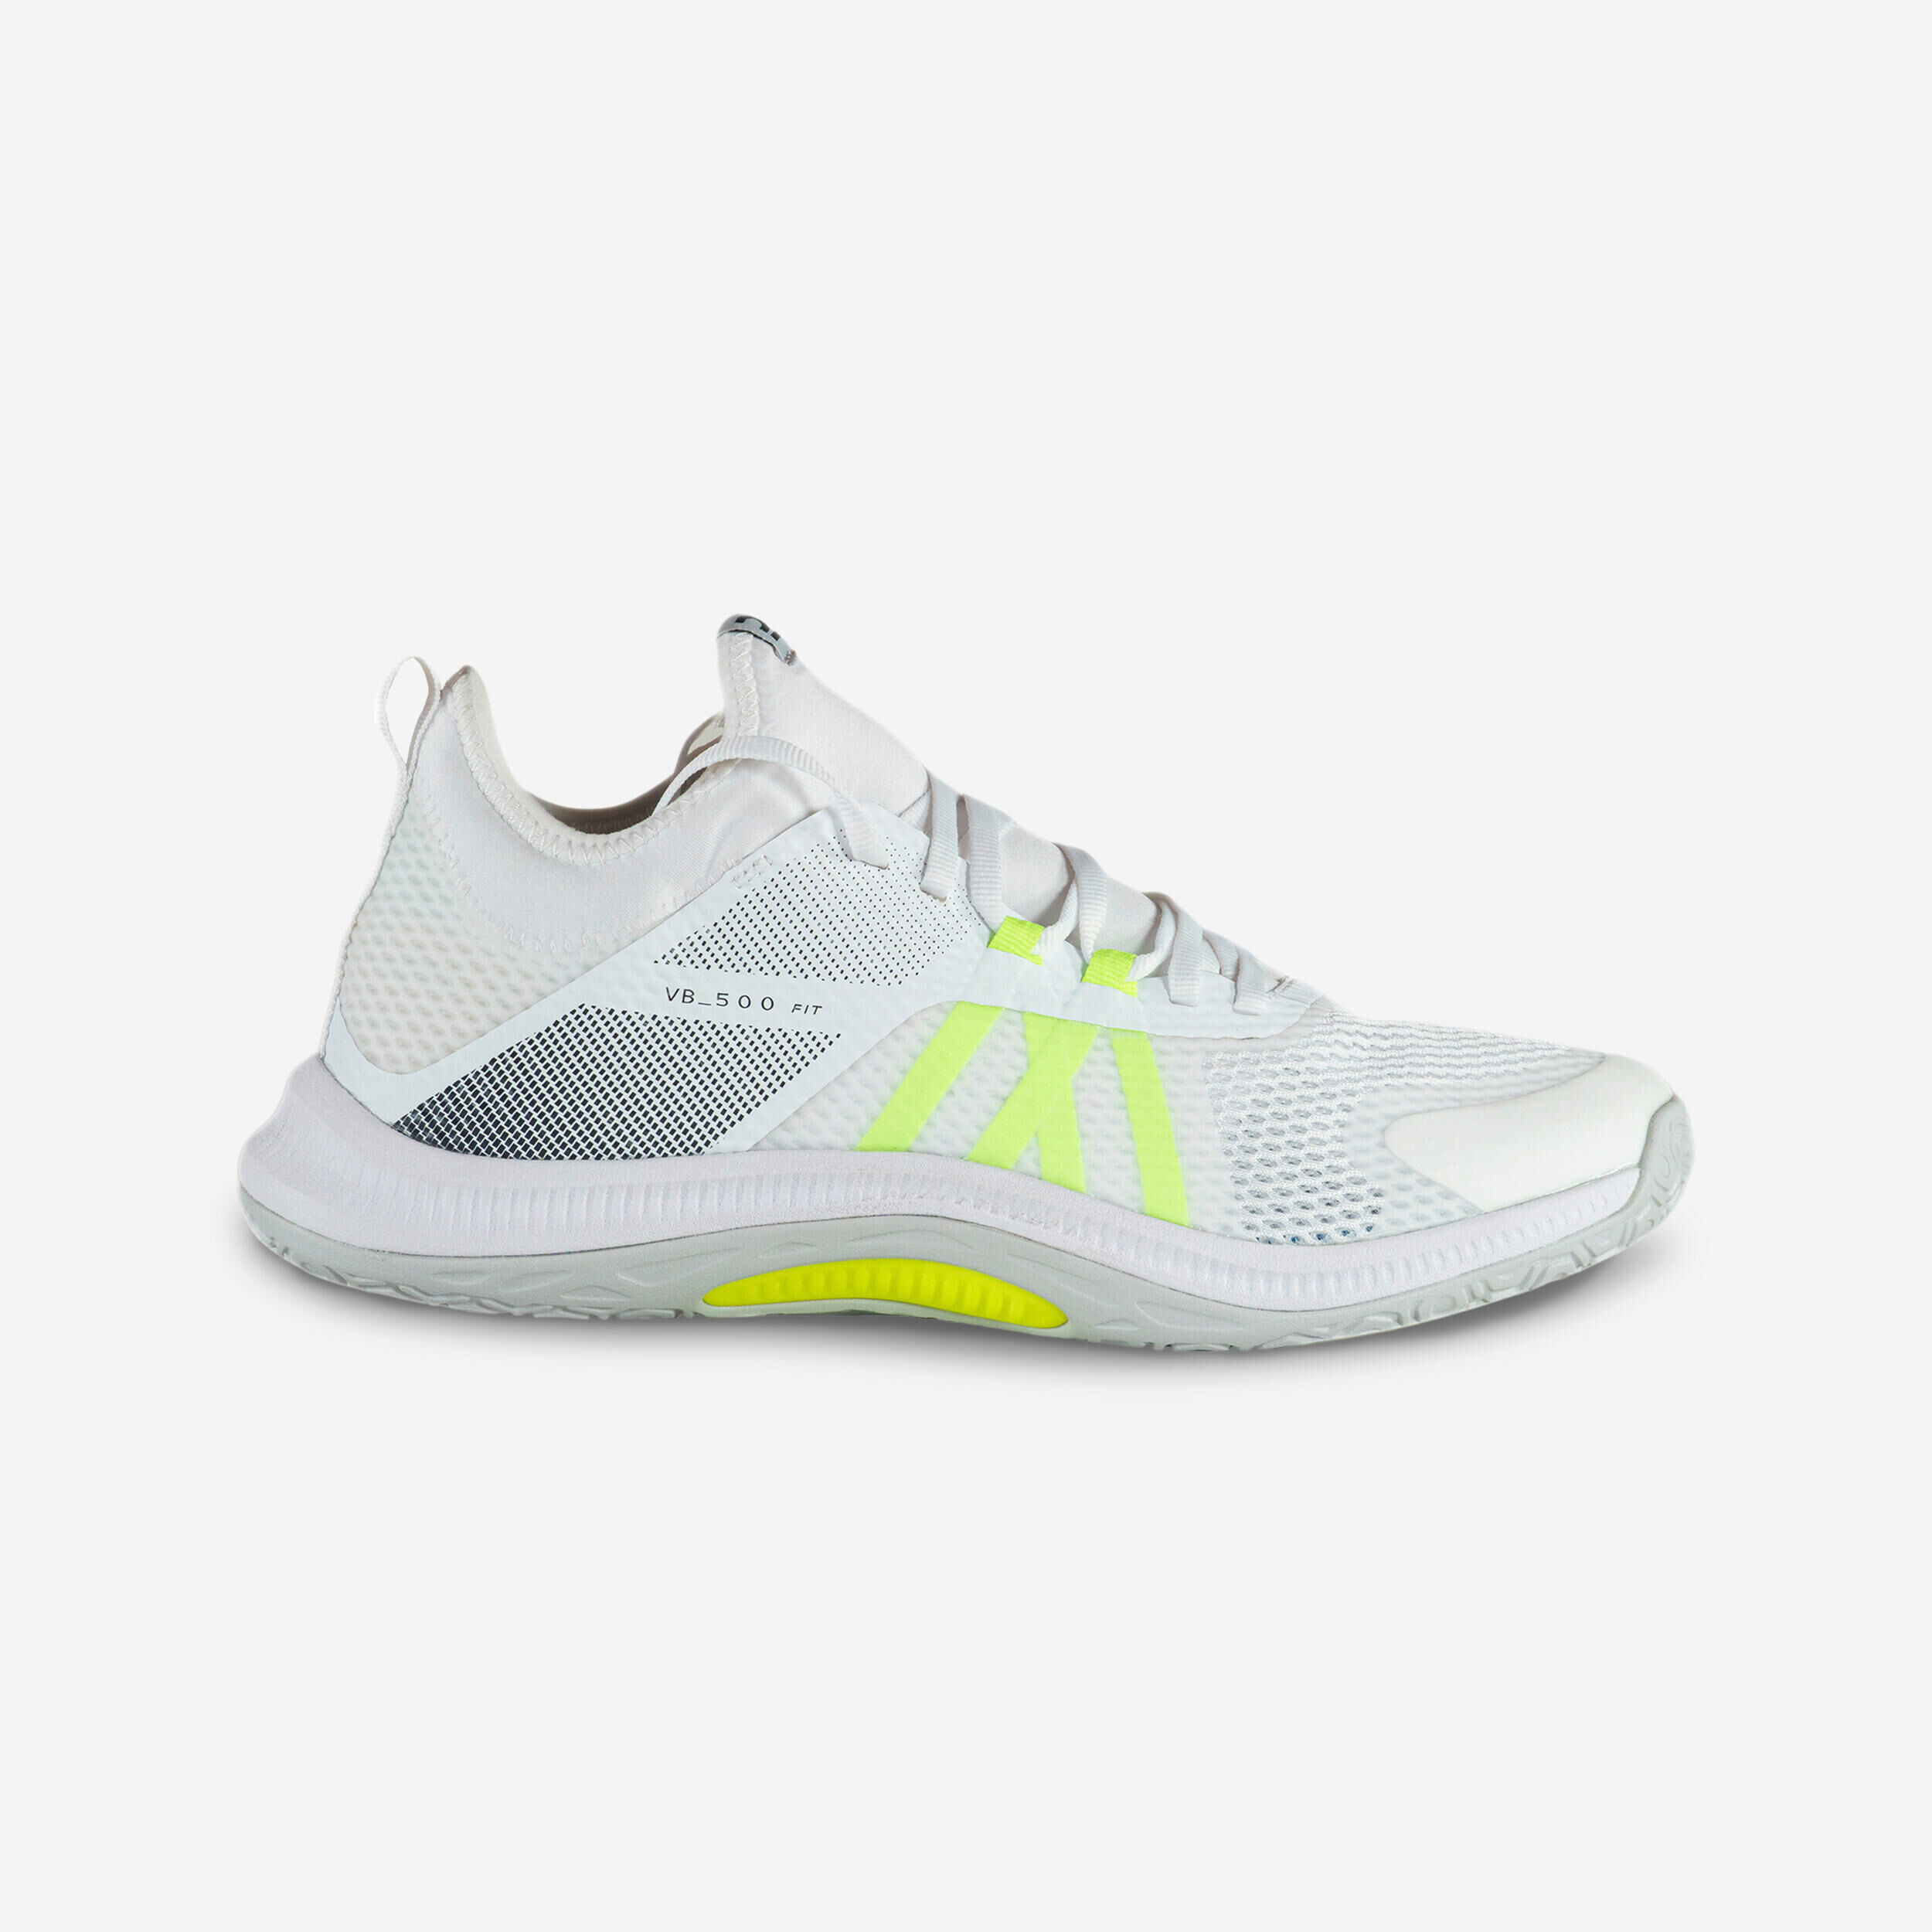 ALLSIX Men's Volleyball Shoes for Regular Use Fit 500 - White/Yellow